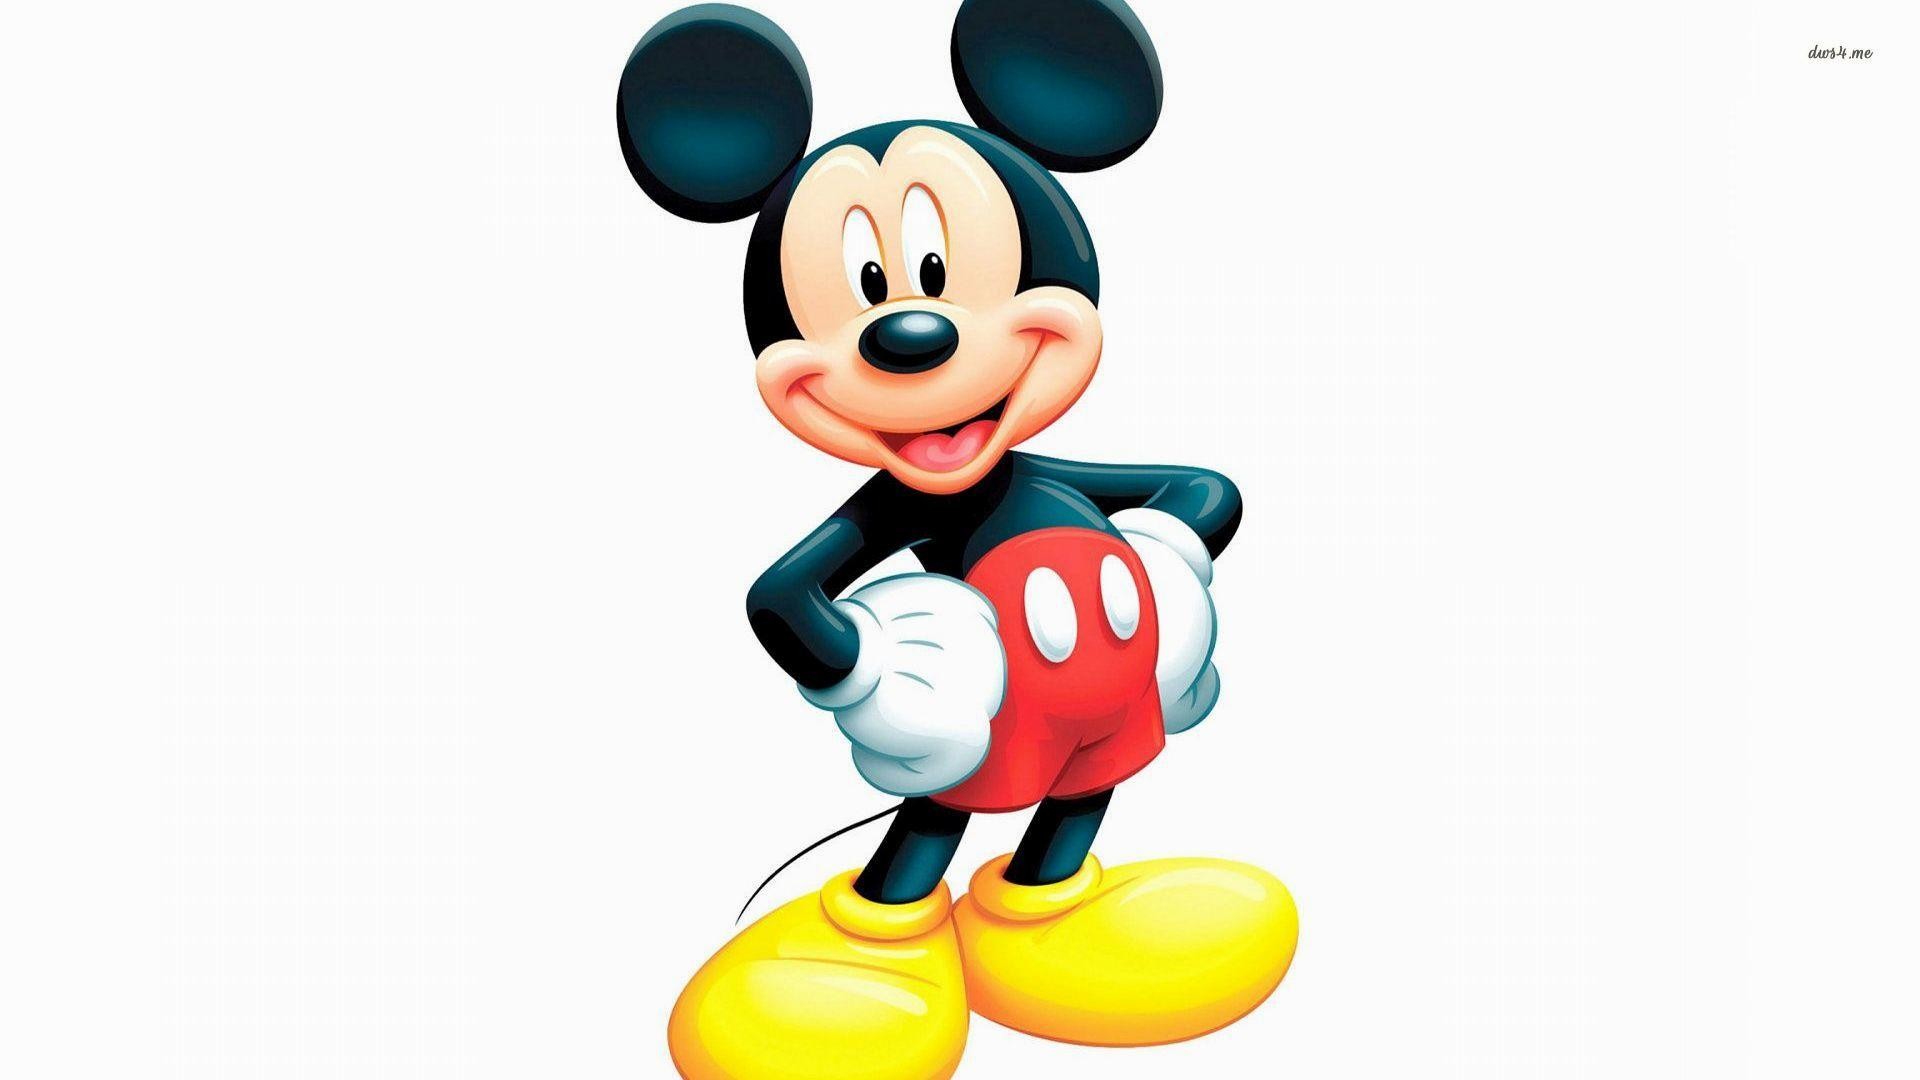 1920x1080 2 Mickey Mouse HD Wallpapers | Backgrounds - Wallpaper Abyss ...